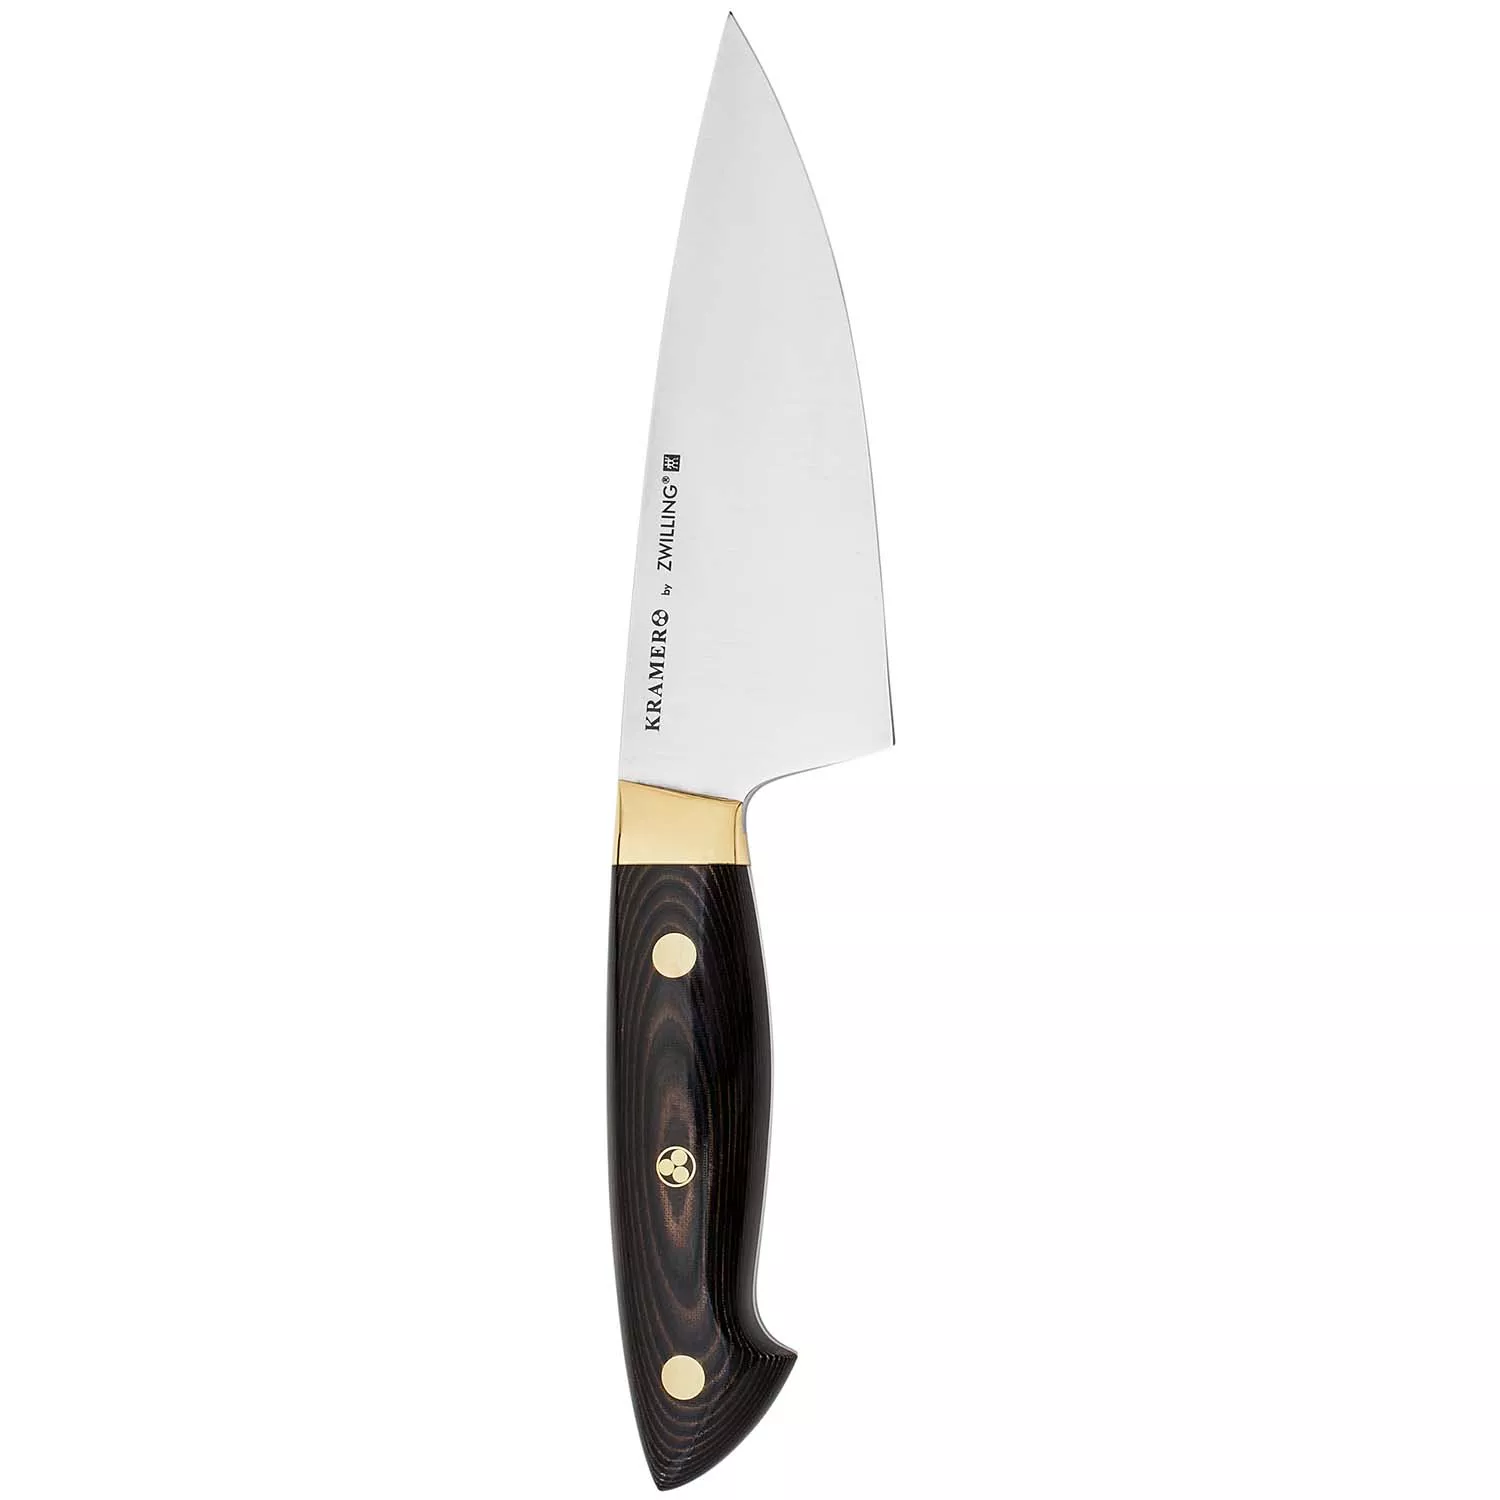 KRAMER by ZWILLING EUROLINE Damascus Collection 6-inch Chef's Knife, 6-inch  - Kroger